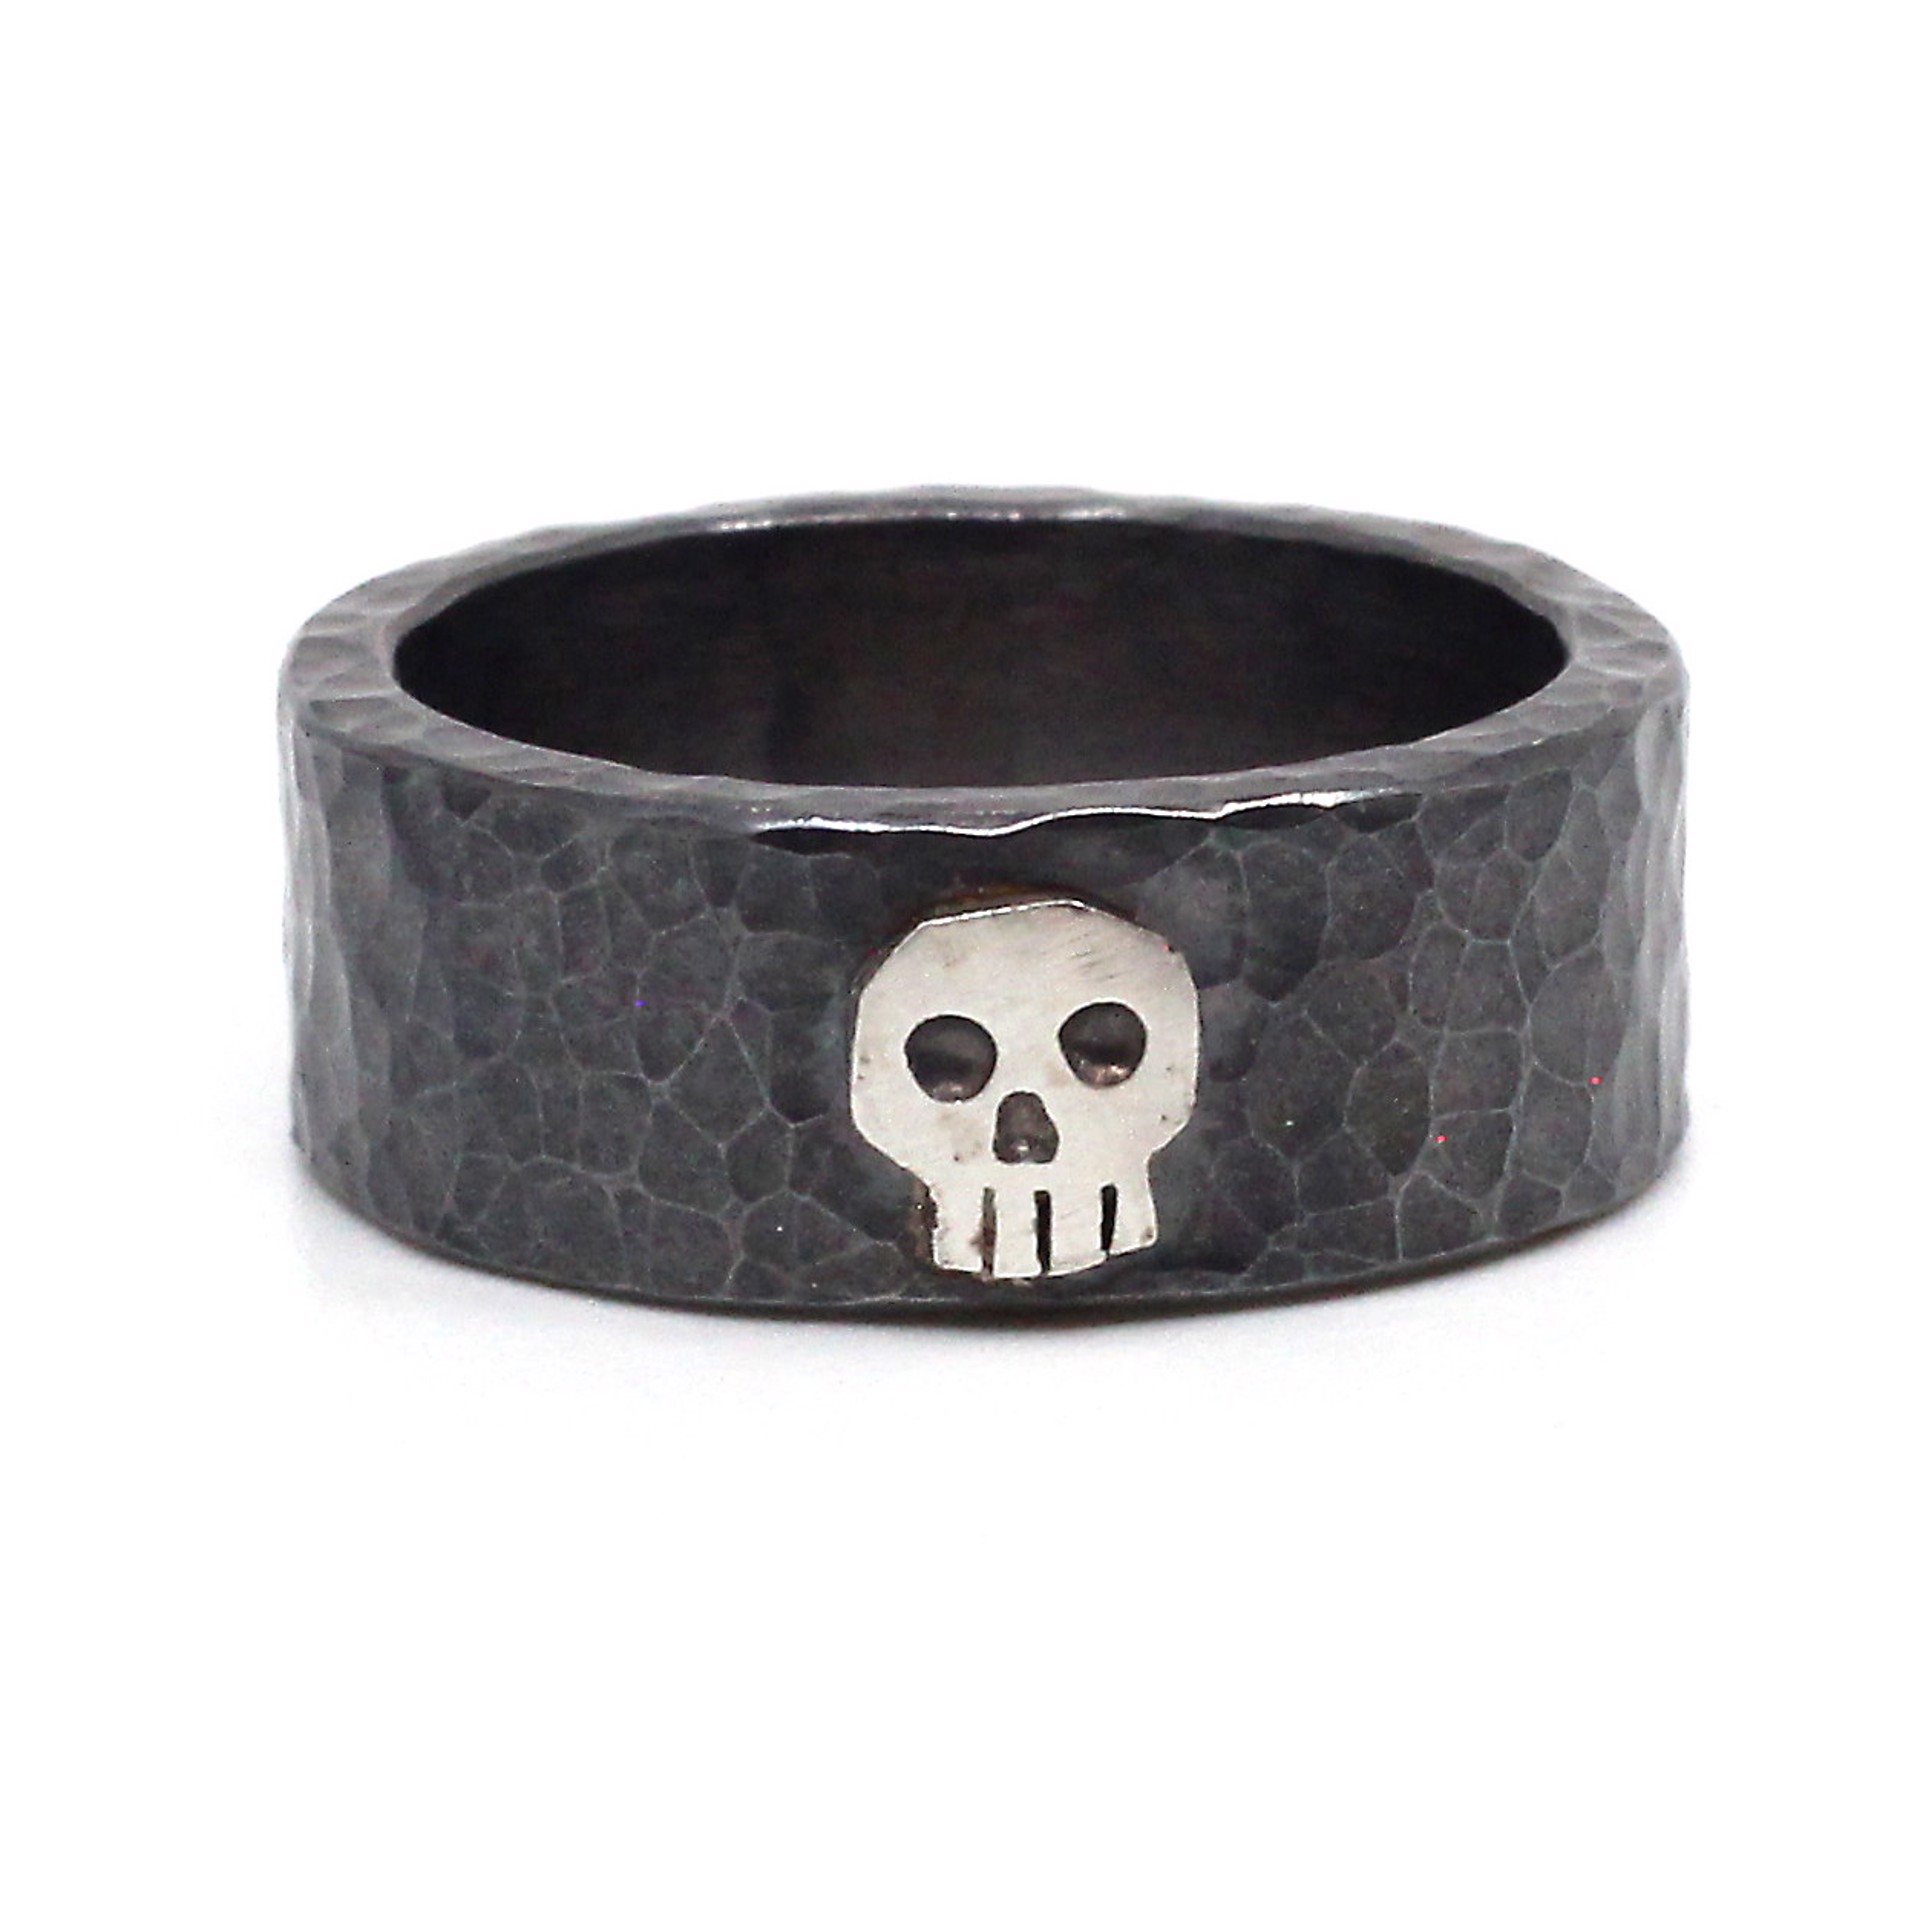 Single Skull Ring (Size 10) by Susan Elnora